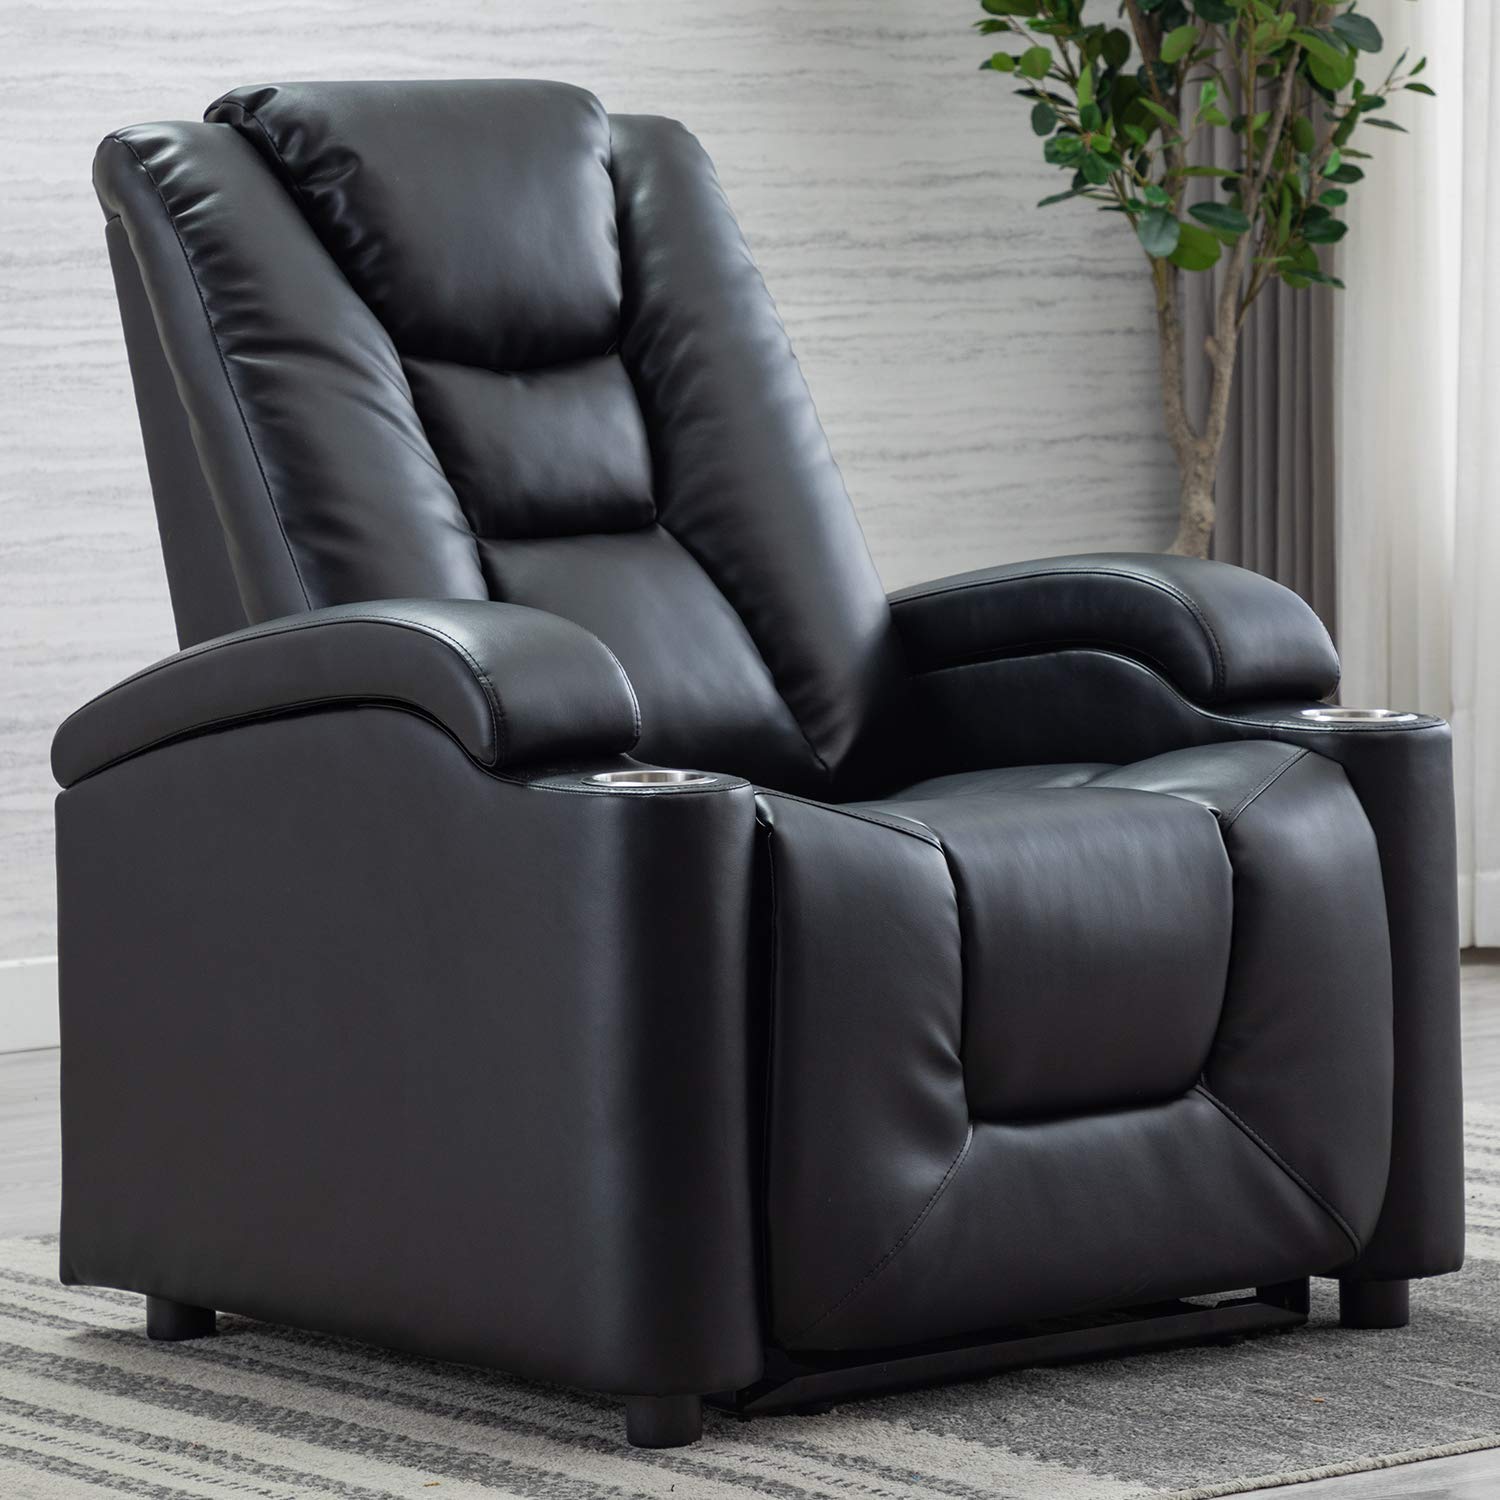 Top 10 Power Recliner Chairs with Cup Holder and USB